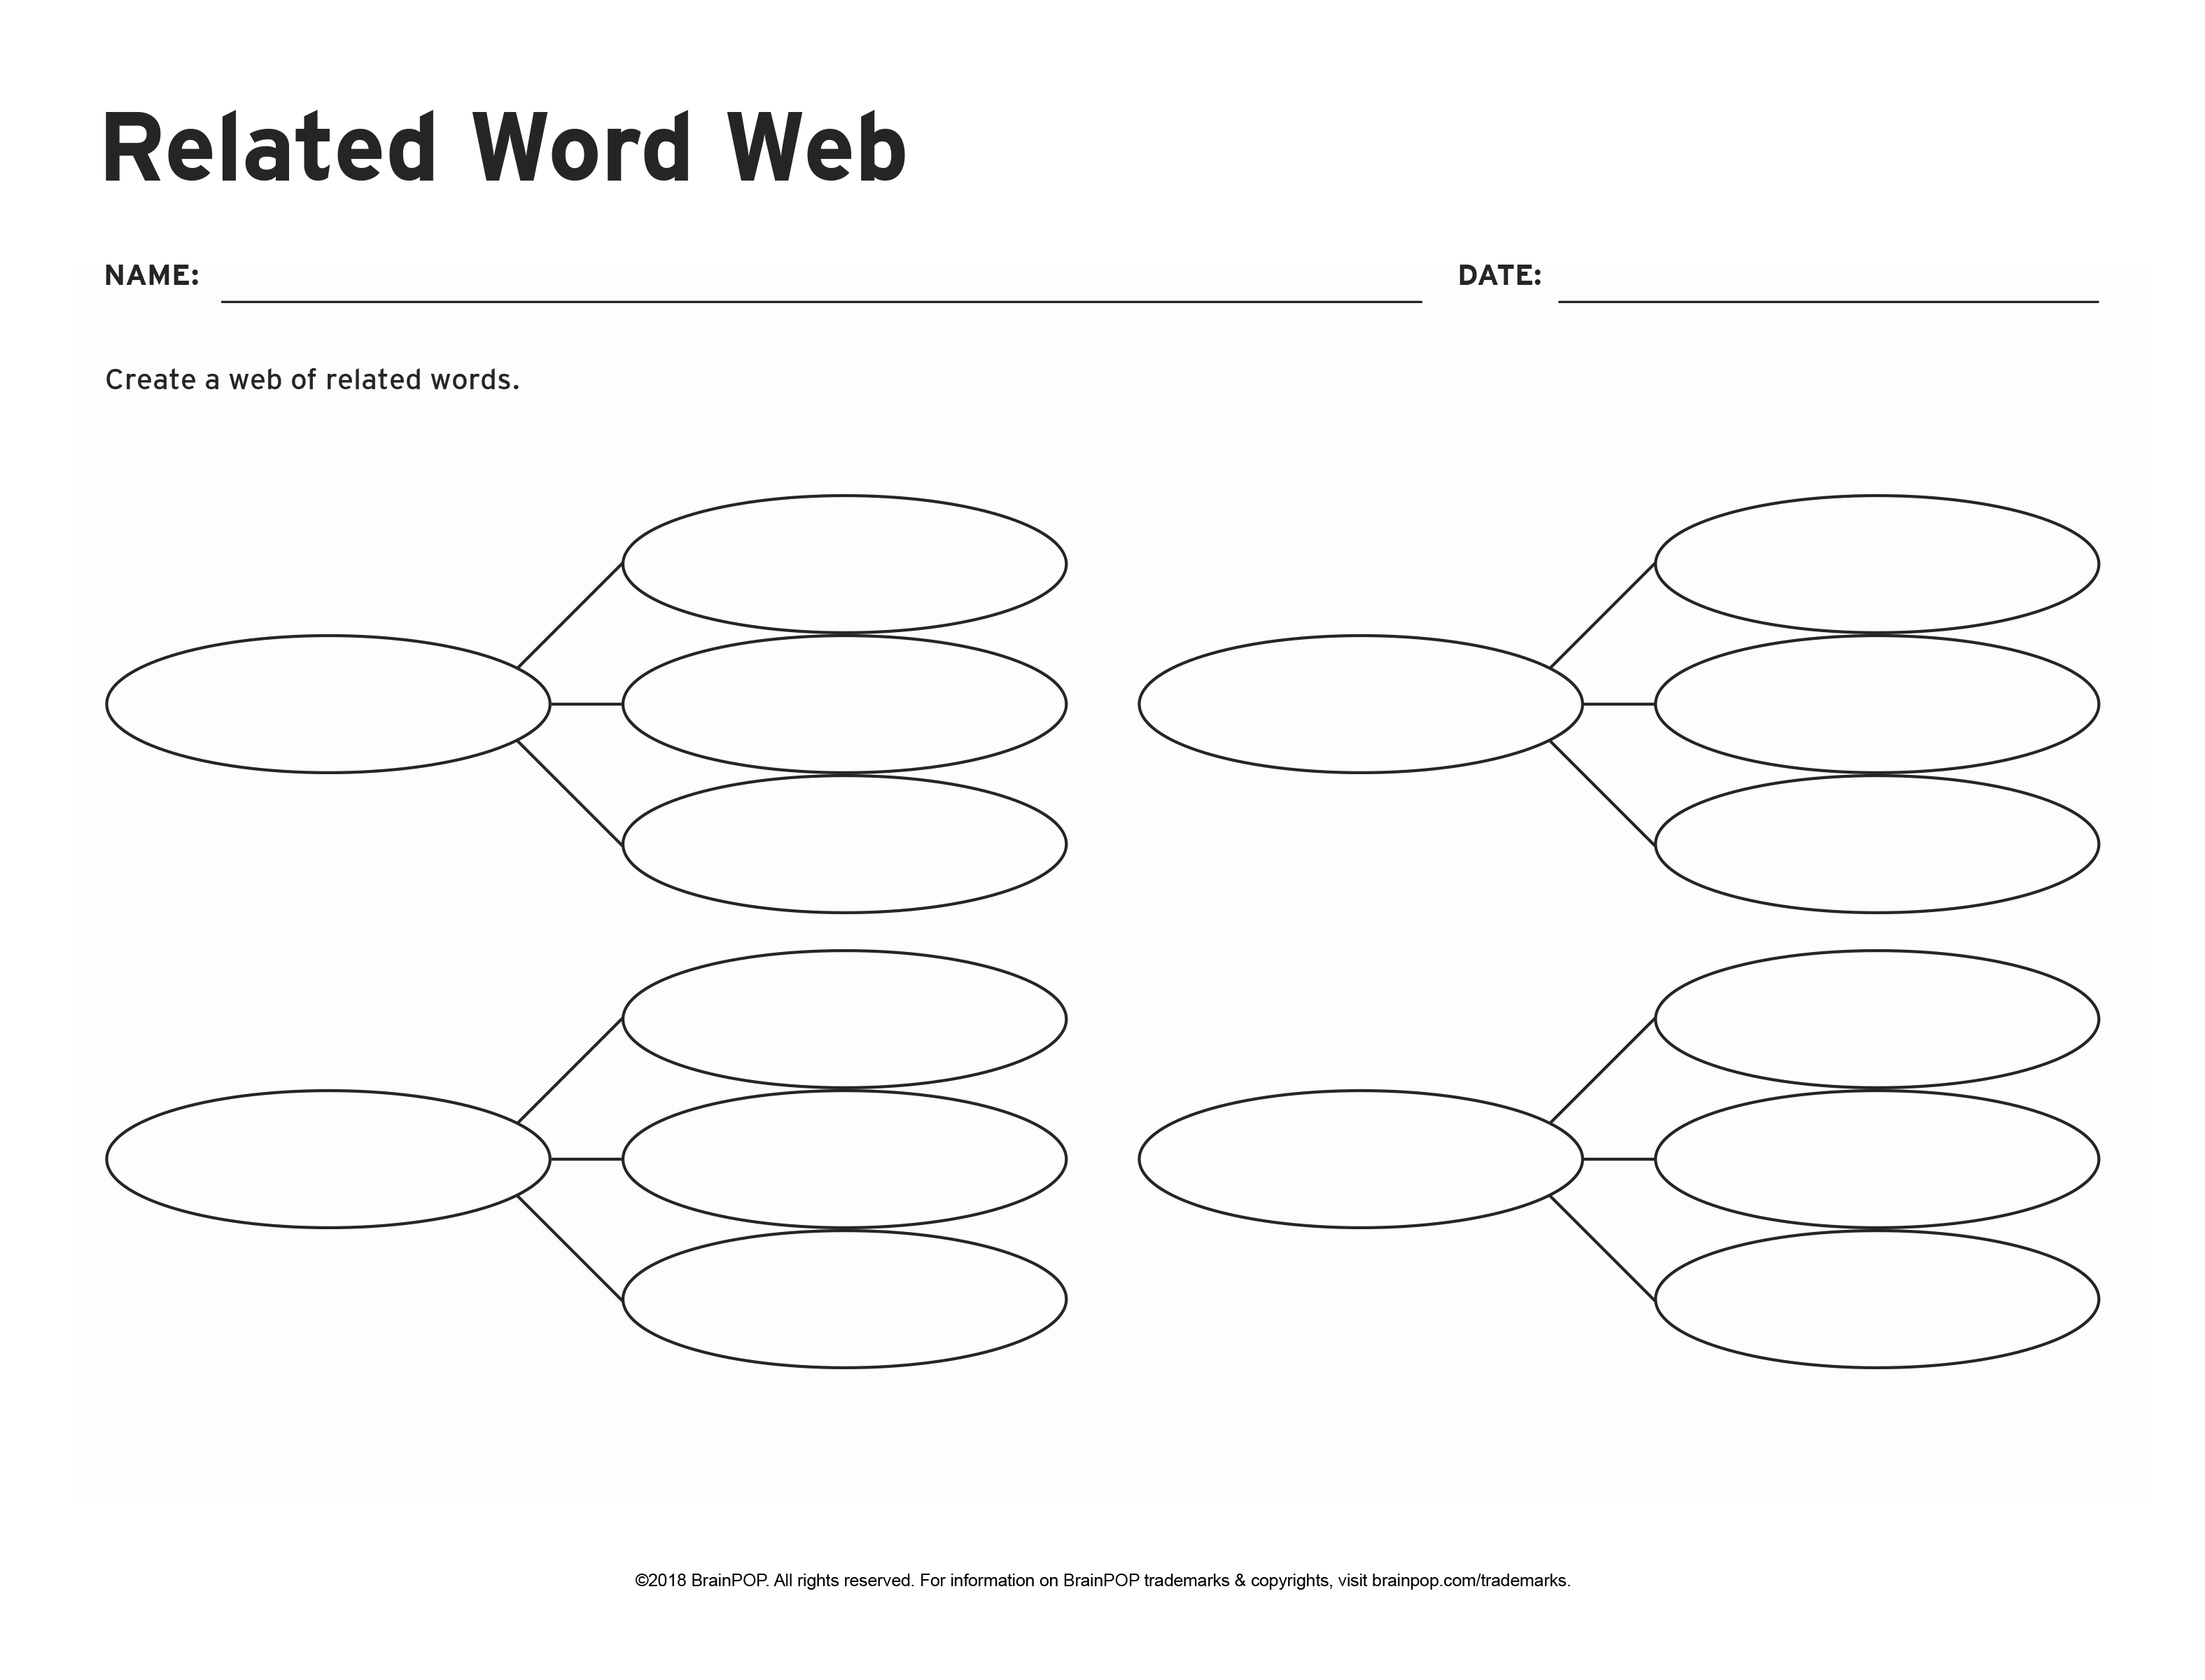 Related Word Web